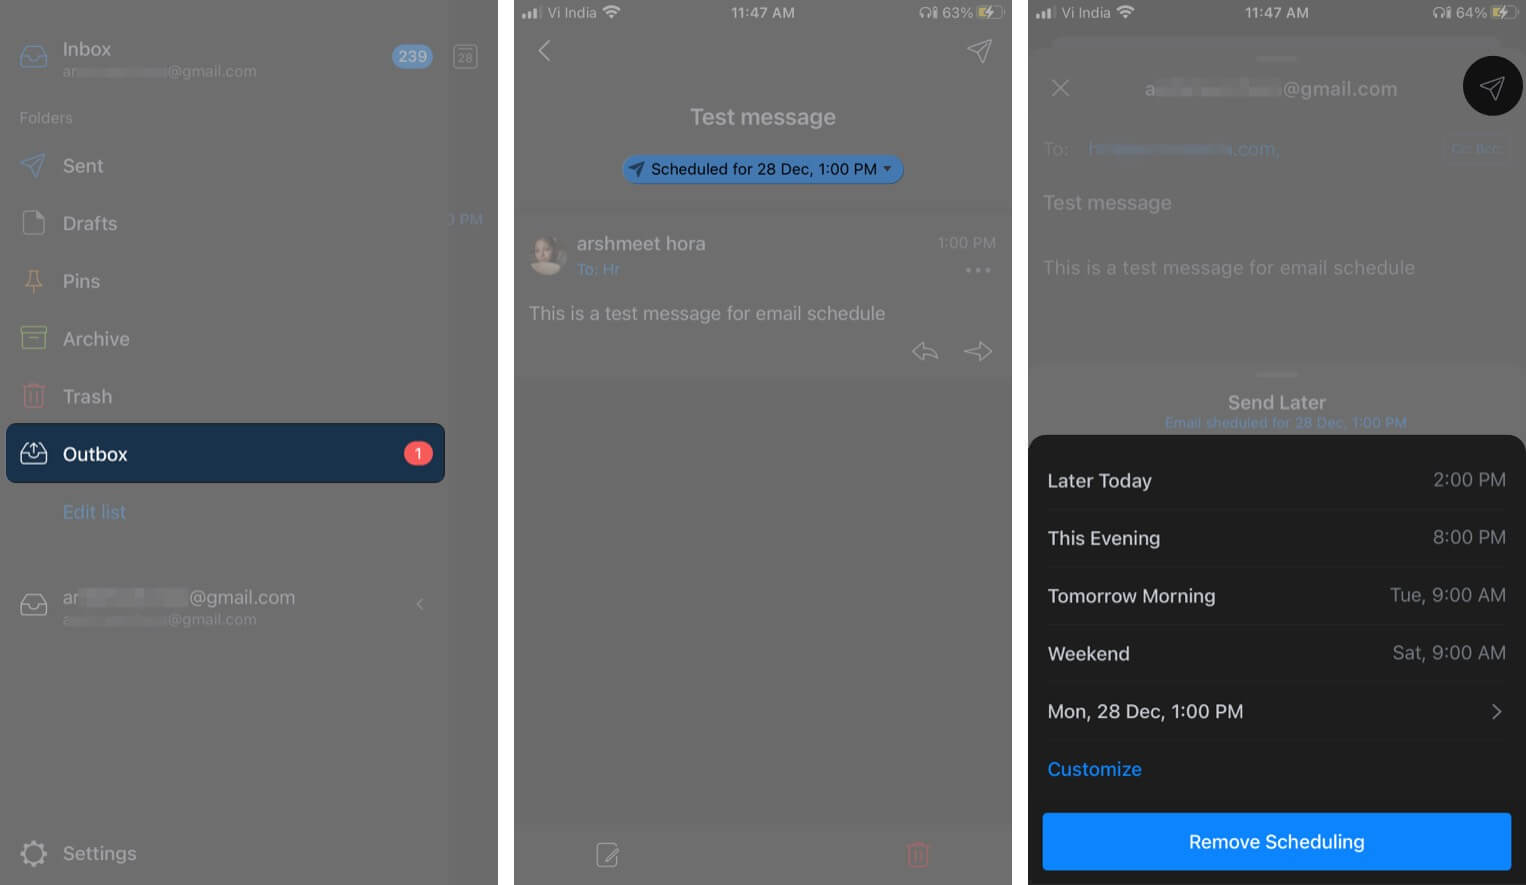 Delete or reschedule the email on iPhone and iPad via Spark app